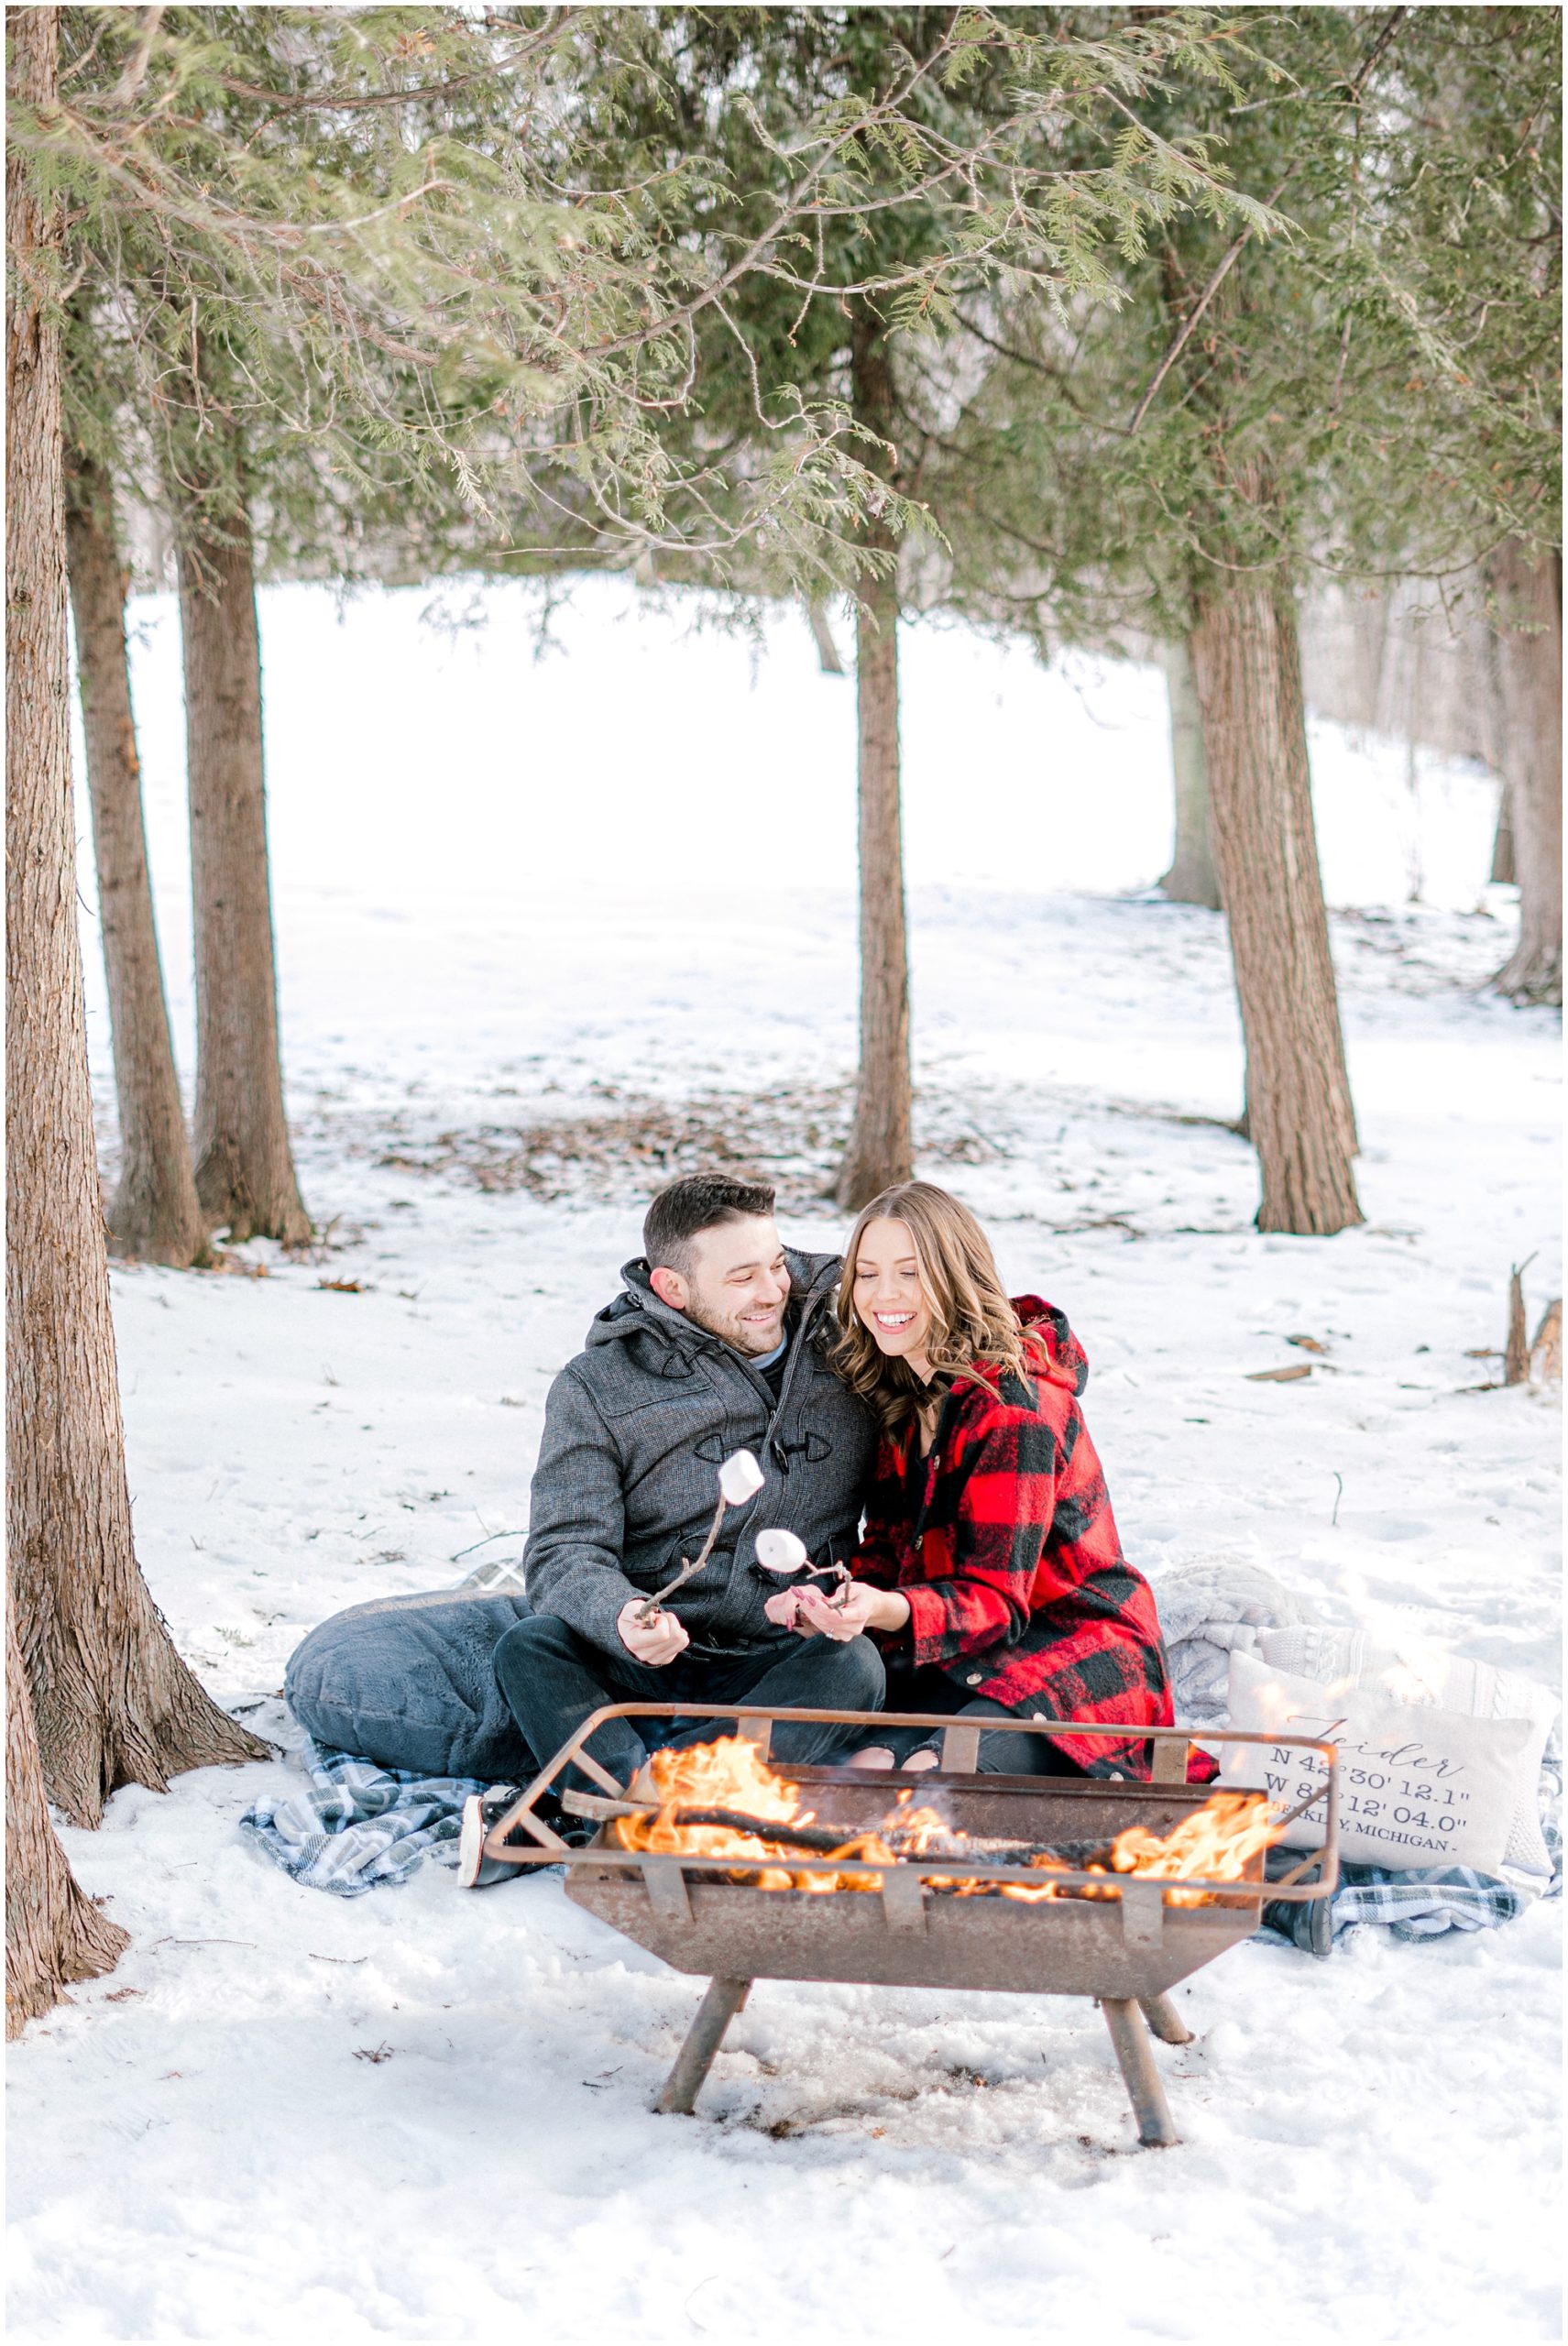 roasting smores in the winter as a winter date night idea